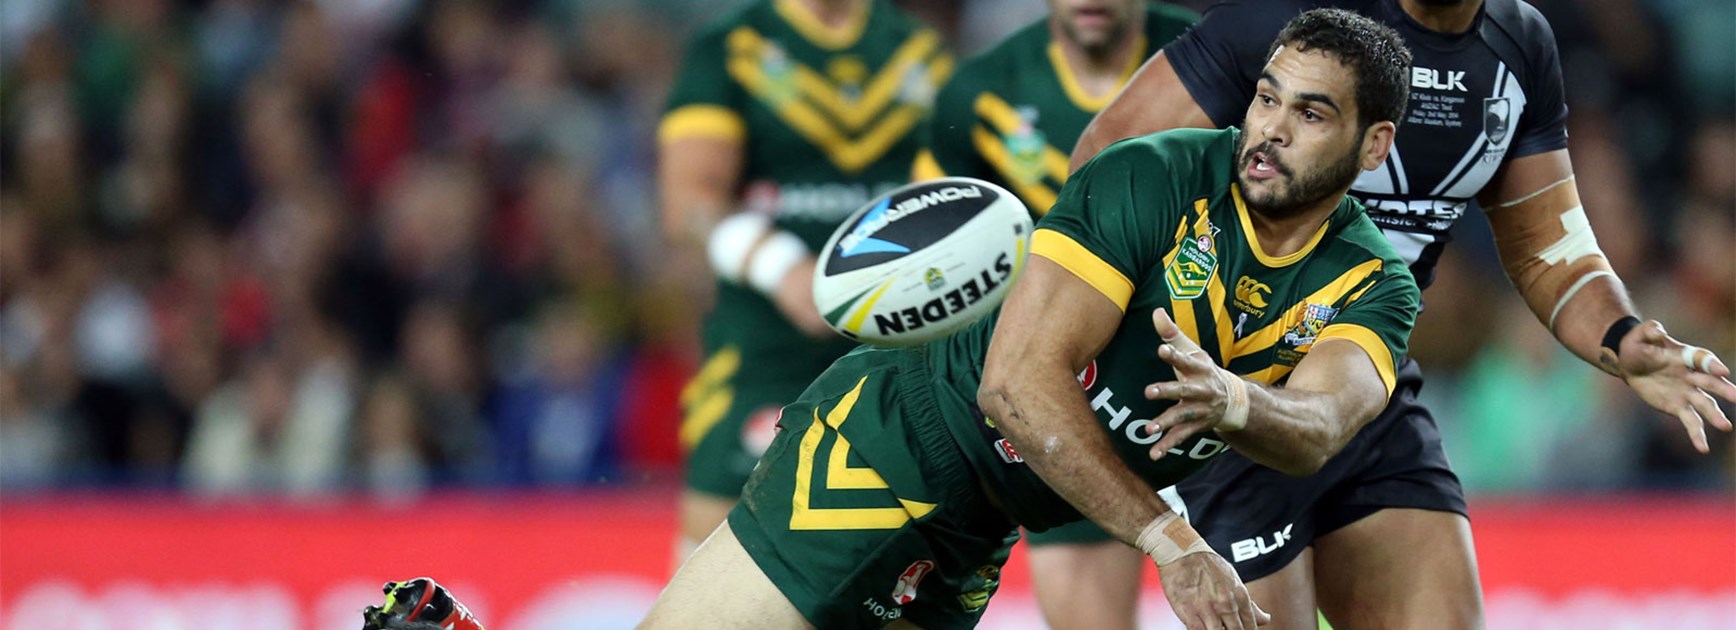 Kangaroos star Greg Inglis gets an offload away during 2014's May Test match against New Zealand.